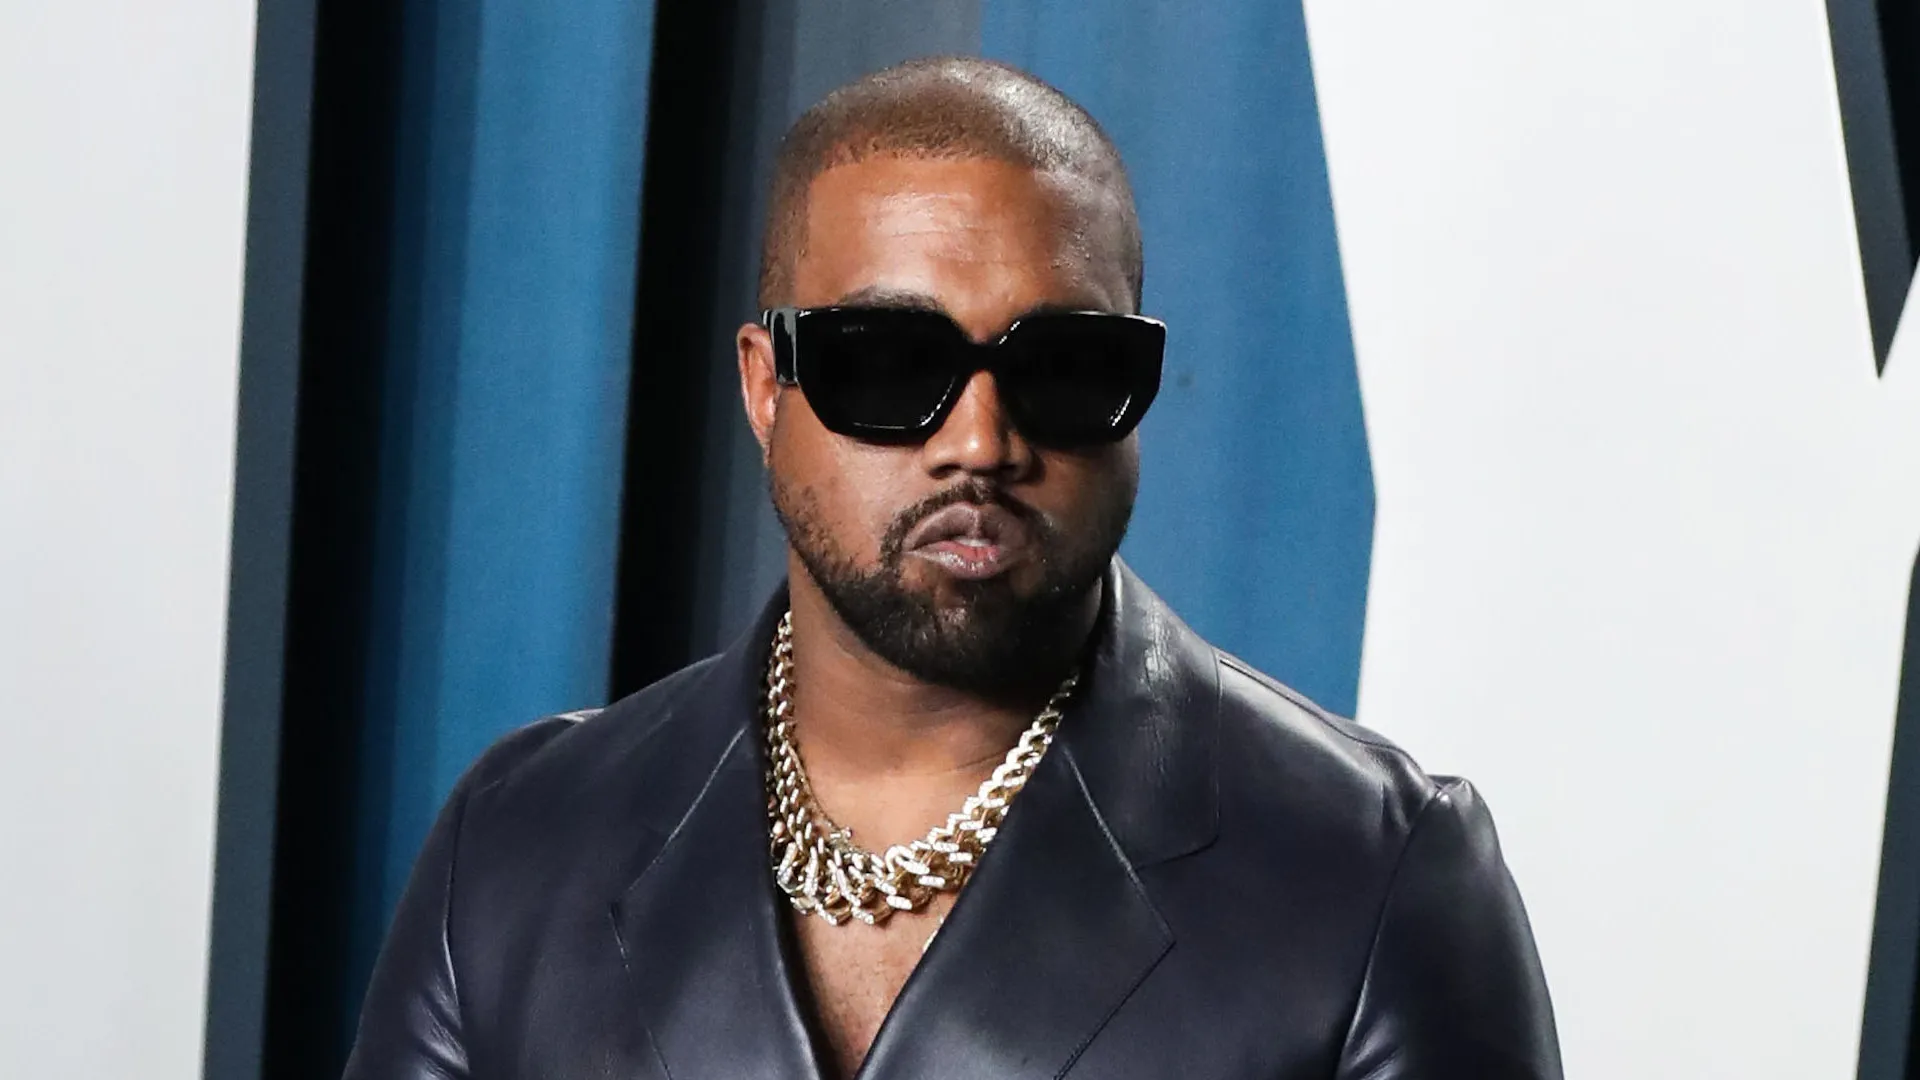 Mandatory Credit: Photo by Image Press Agency/NurPhoto/Shutterstock (12545073b)(FILE) Kanye West Legally Changes His Name to Ye.